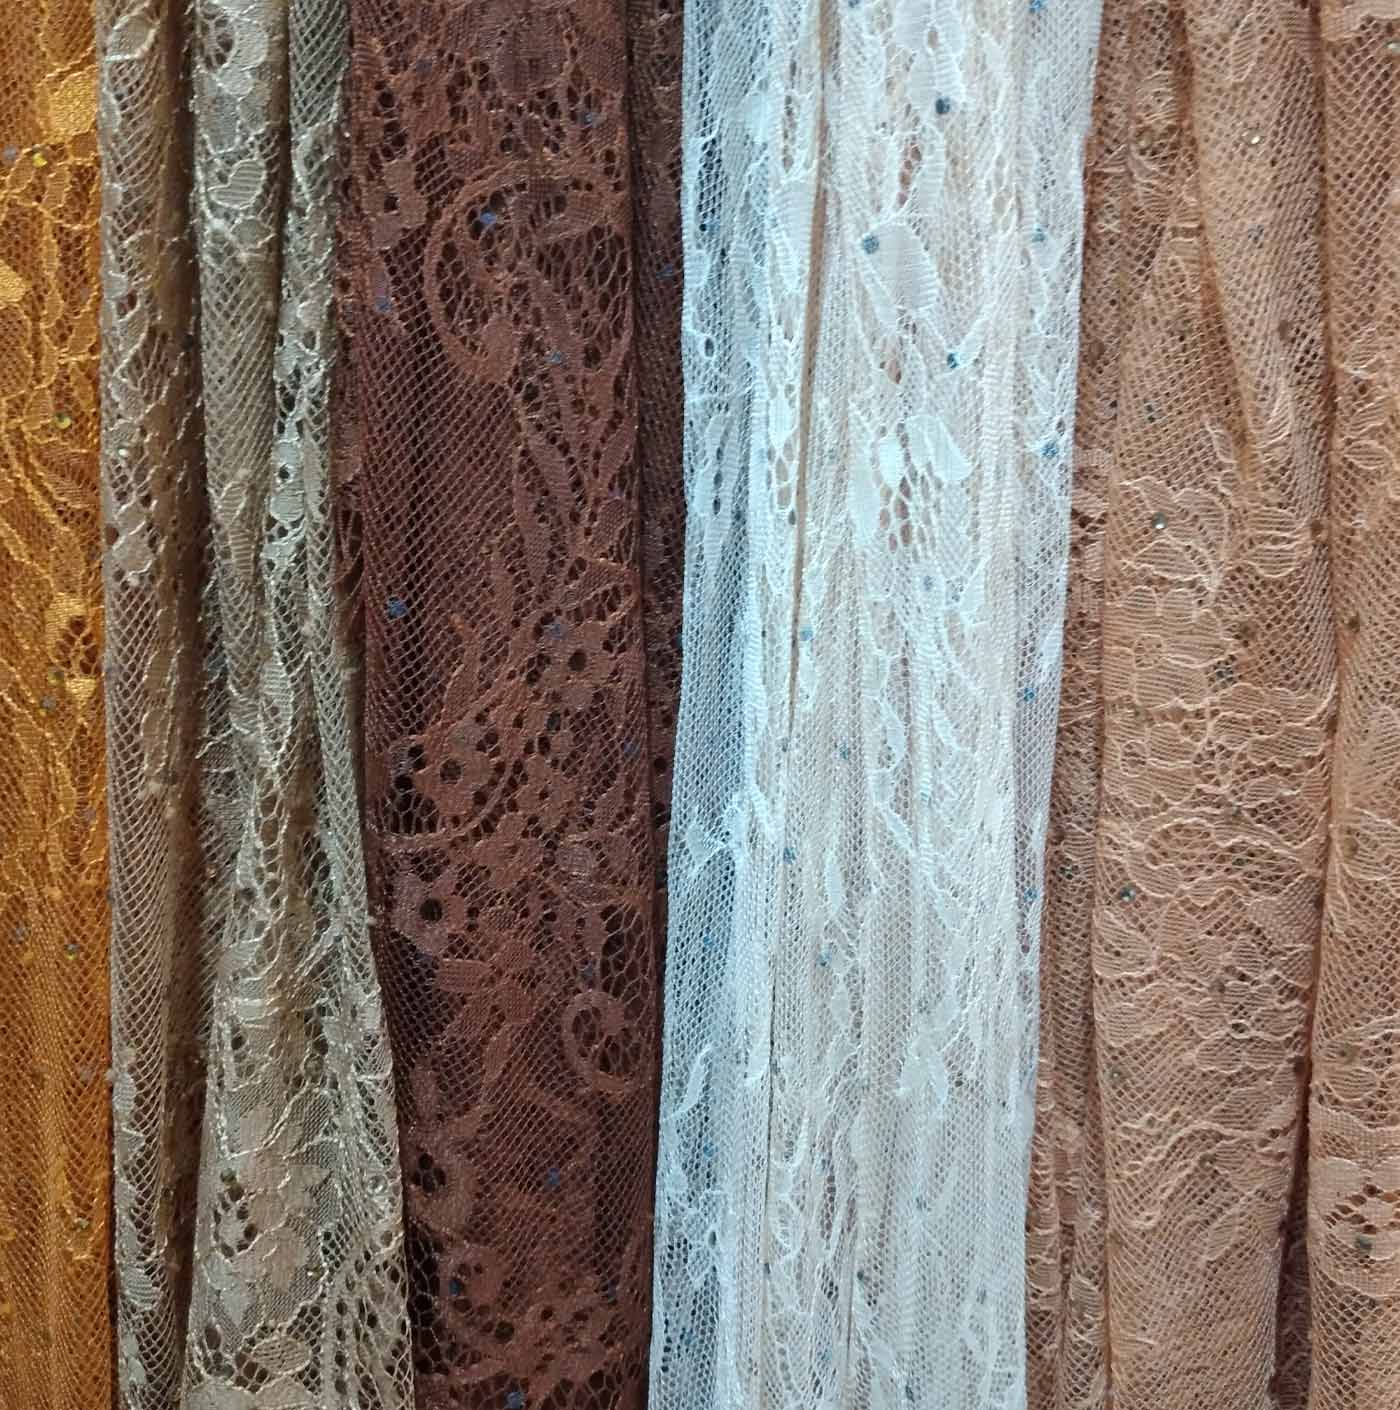 Stones Plaited Chantilly Lace Fabric Collections